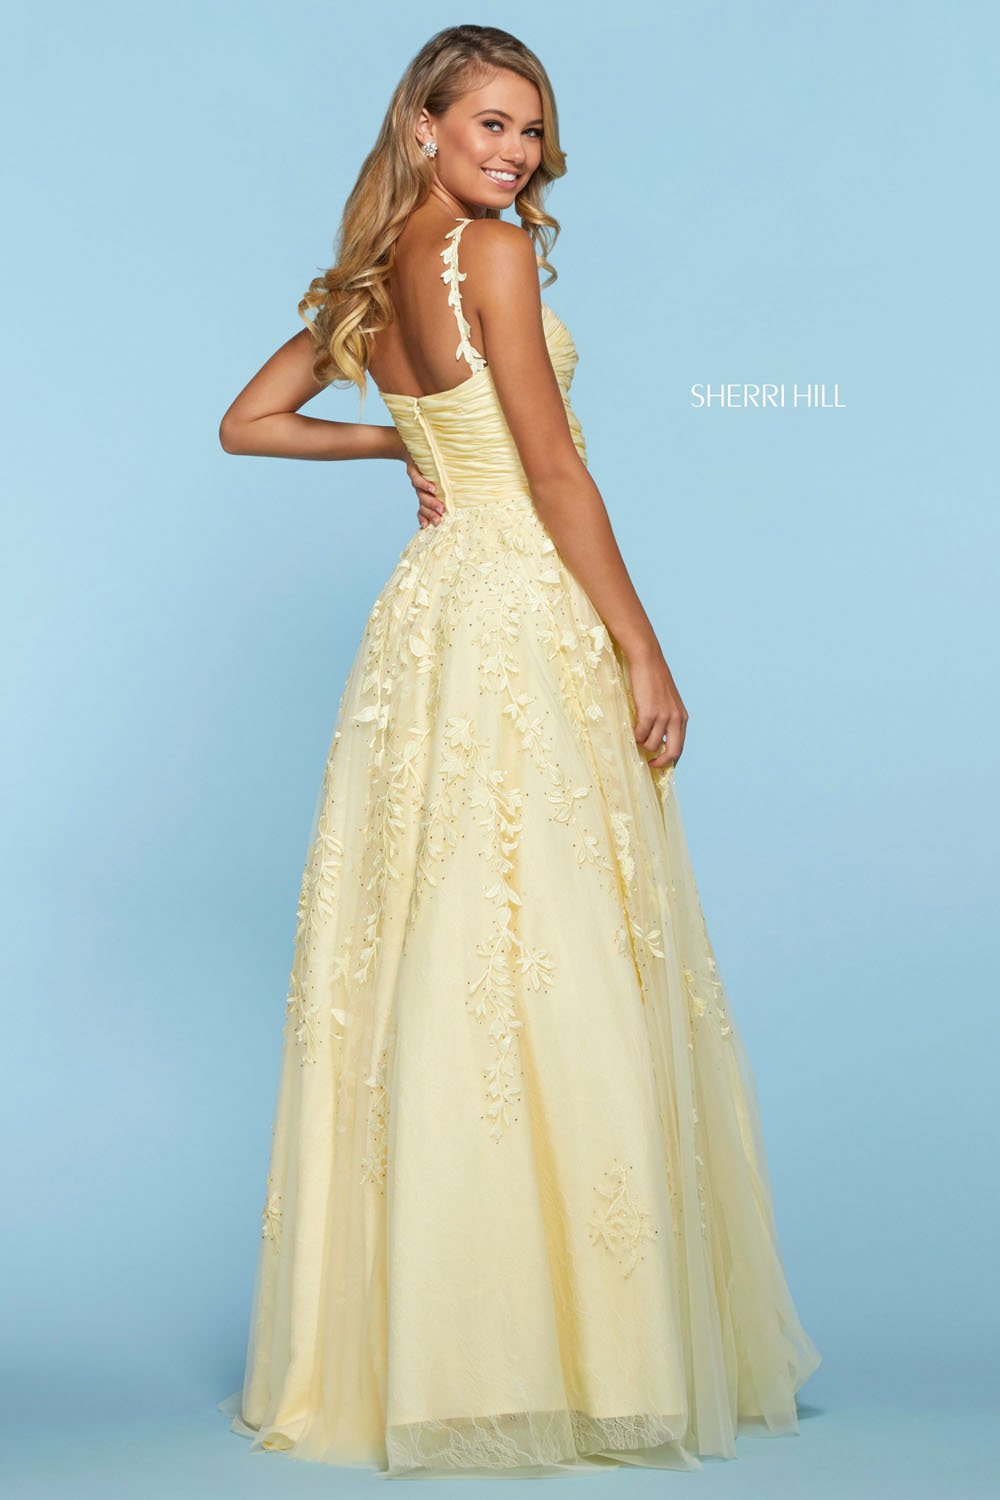 Sherri Hill 53344 dress images in these colors: Blush, Ivory, Light Blue, Yellow, Red, Black.